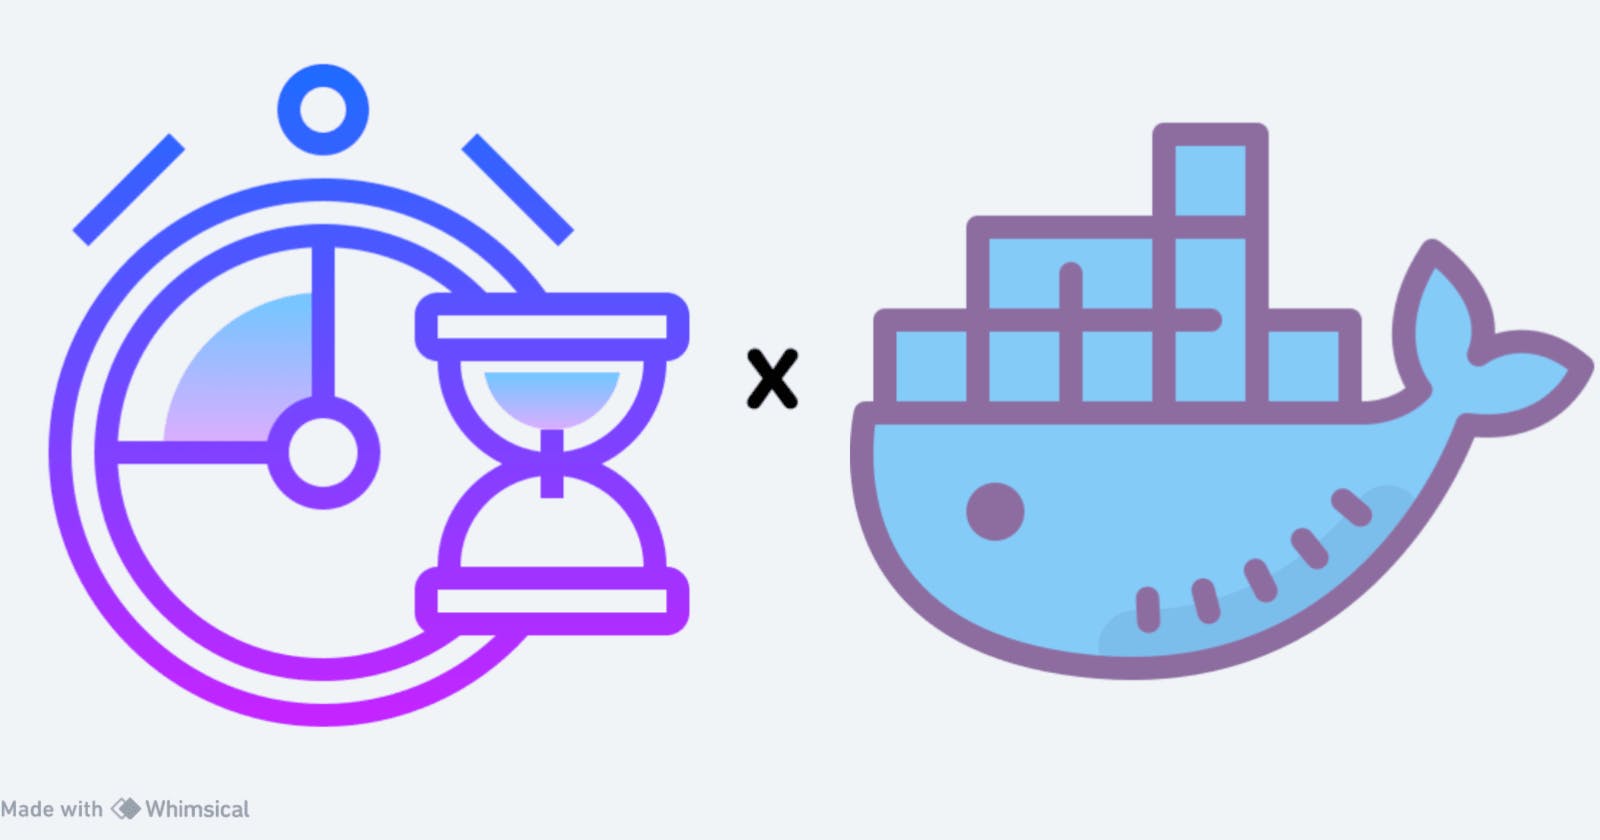 How to Run Scheduled Tasks Using Cron and Docker